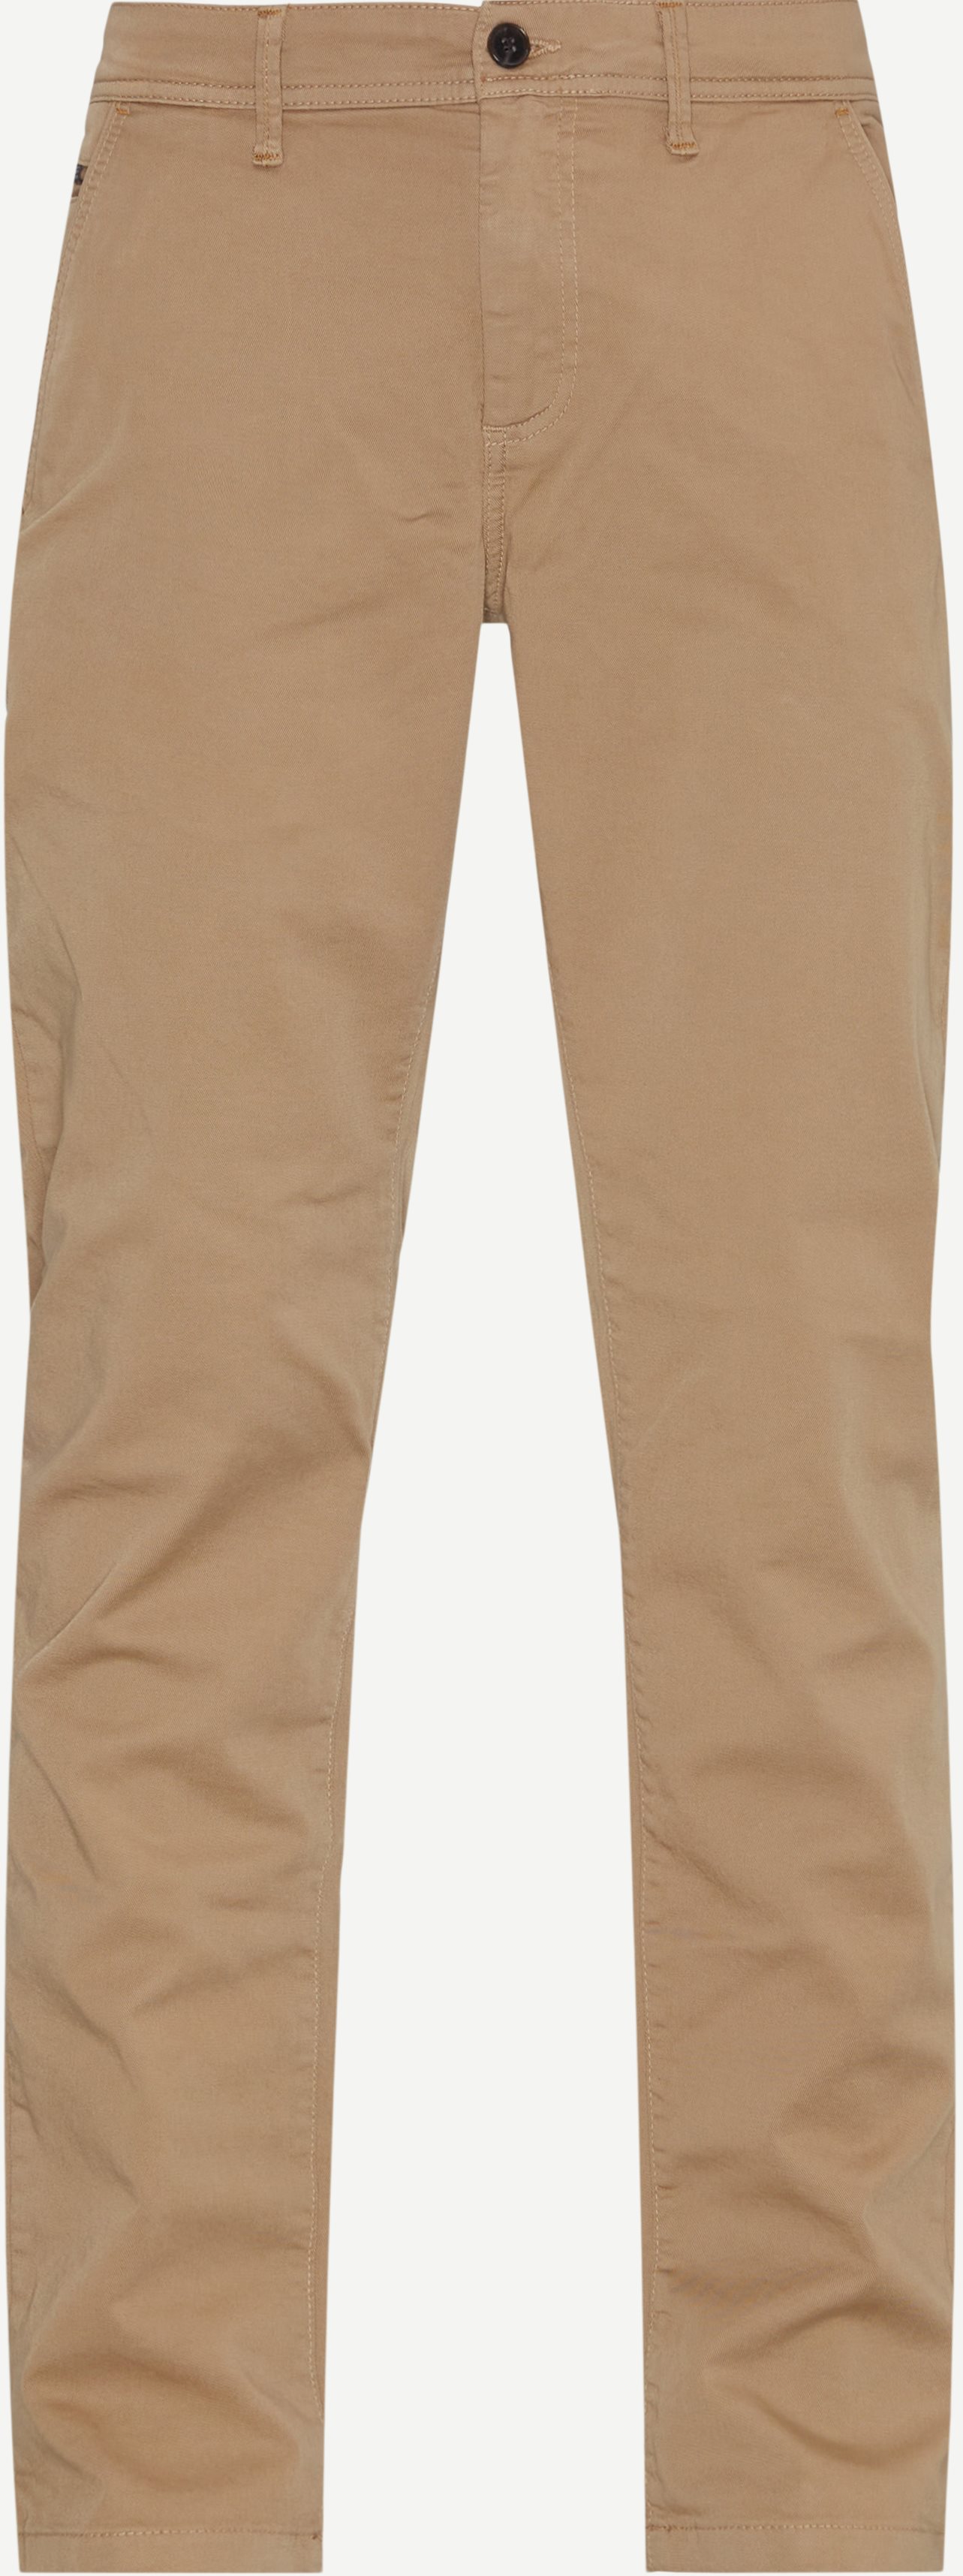 Signal Trousers 11277/21277 607 Brown